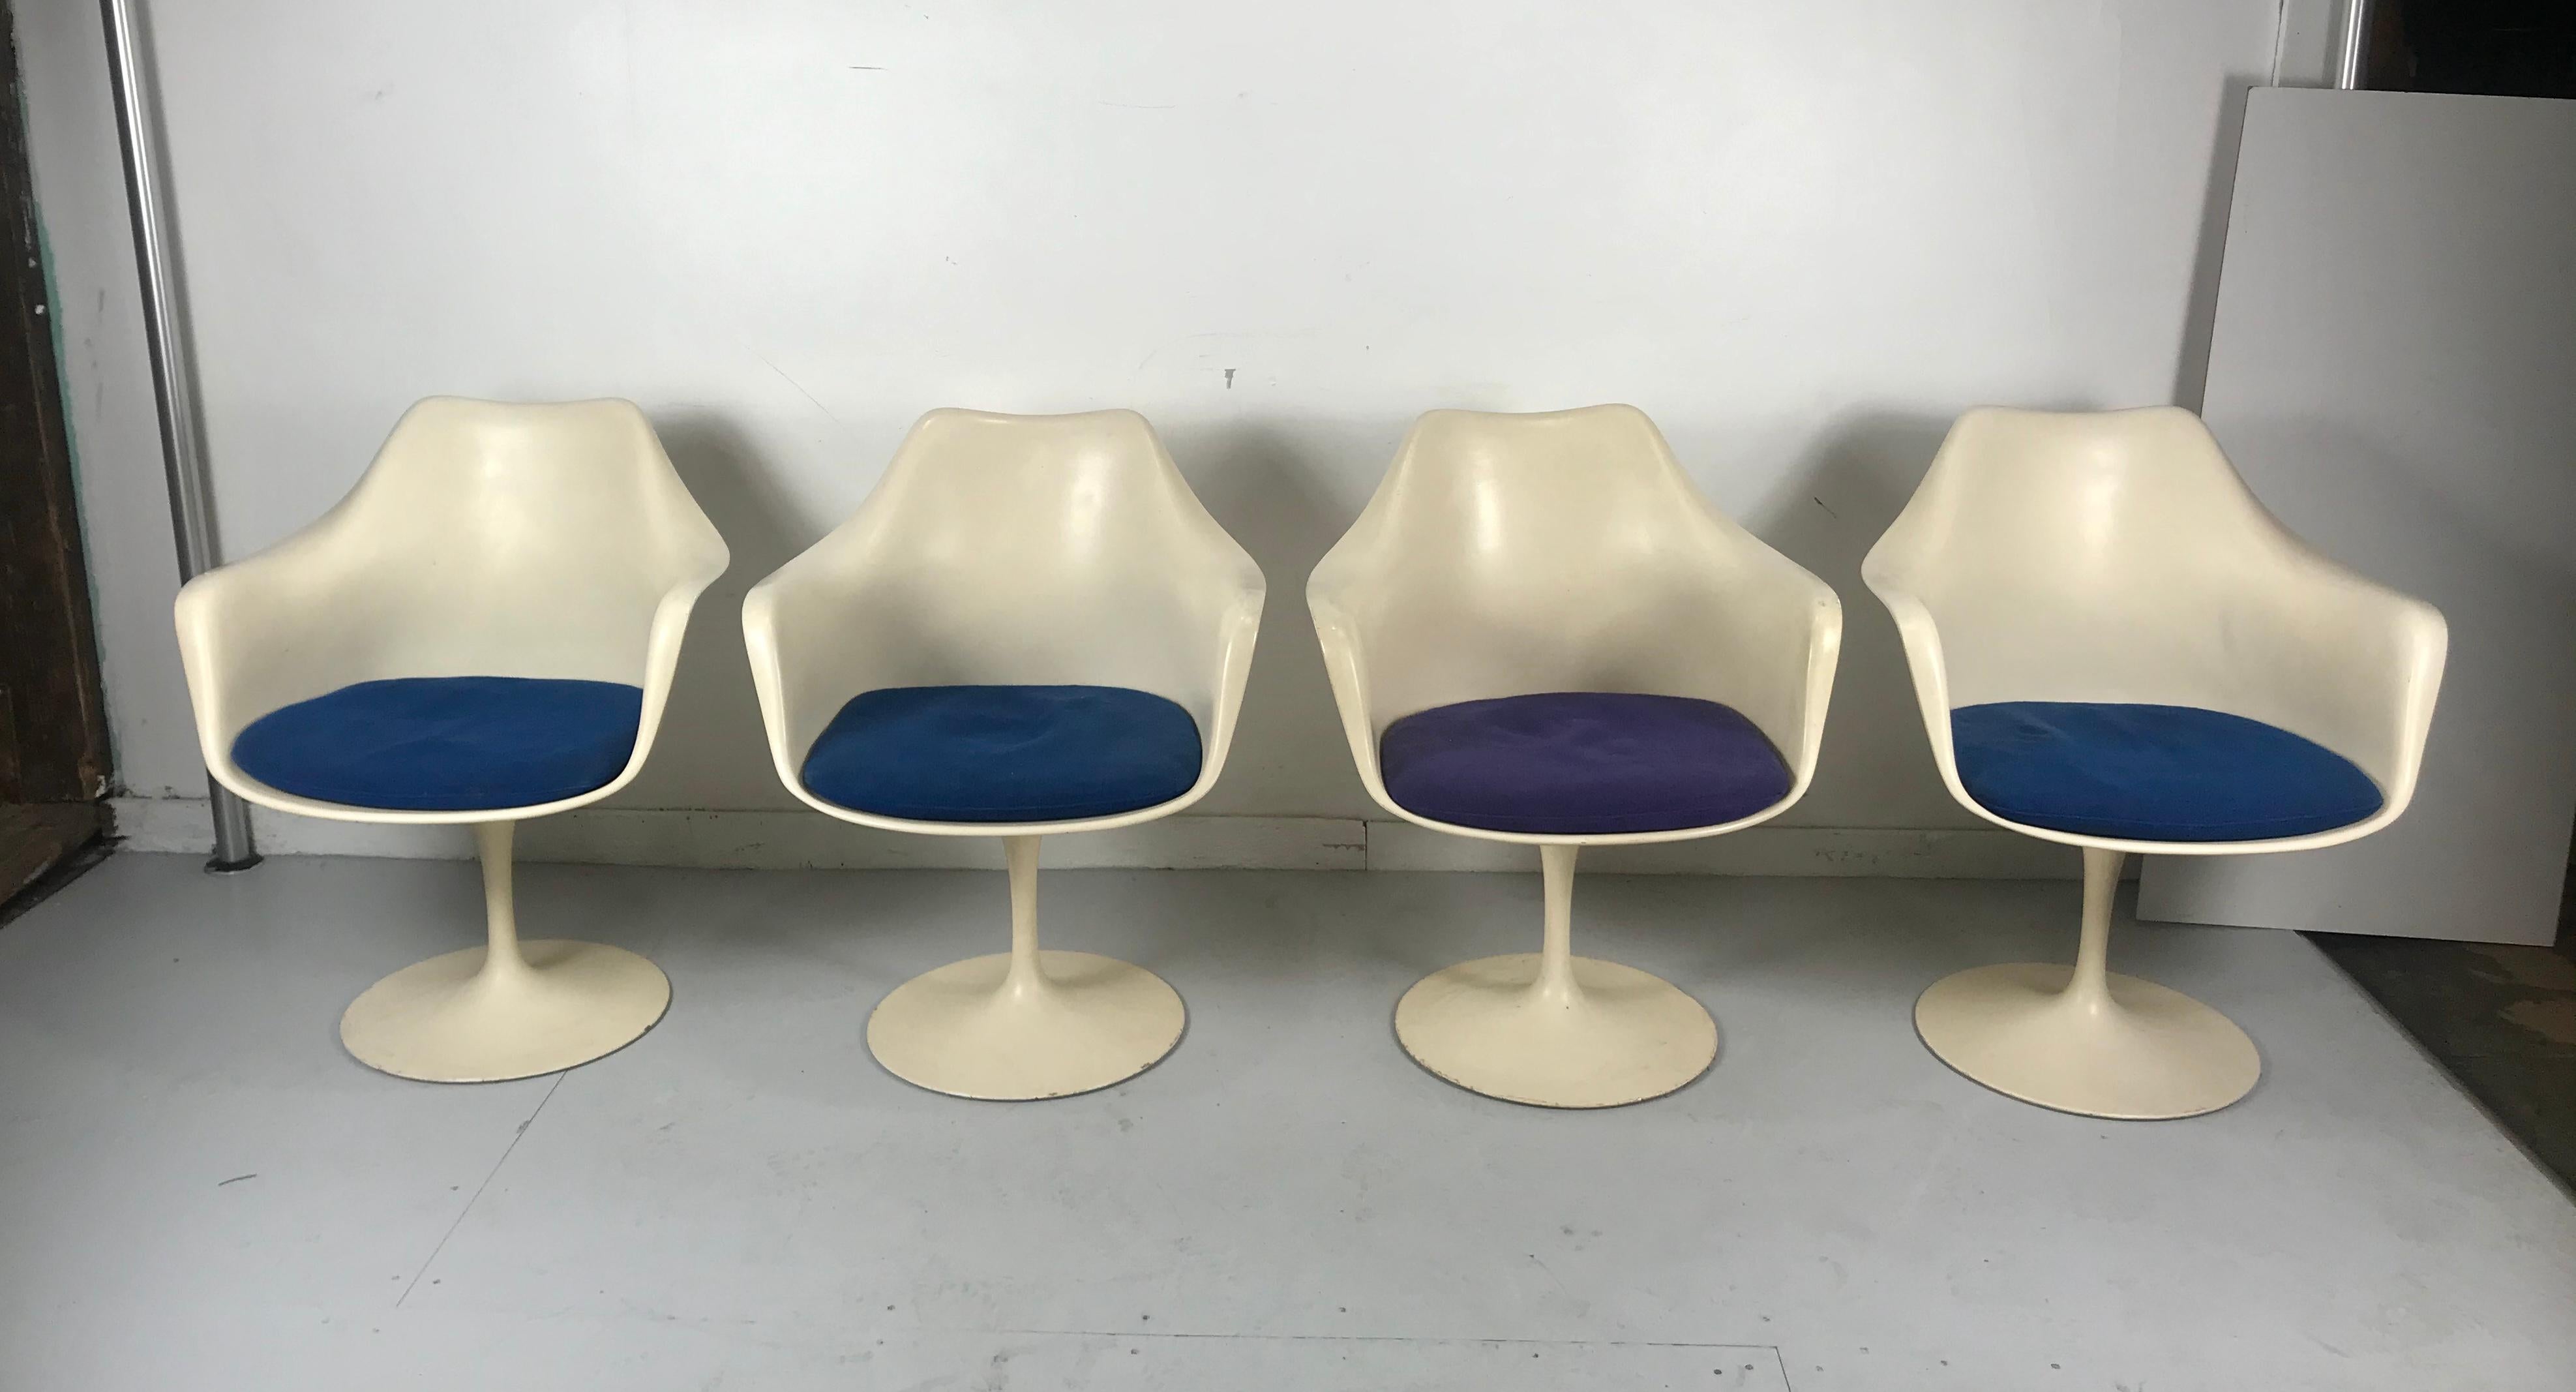 Classic set of four vintage Eero Saarinen Tulip chair. Early Knoll labels. All swivel 360%. Nice vintage set. Retain original seat pads, three blue, one purple. In useable condition, free of rips, tears, dry-rot etc. minor soiling. Original